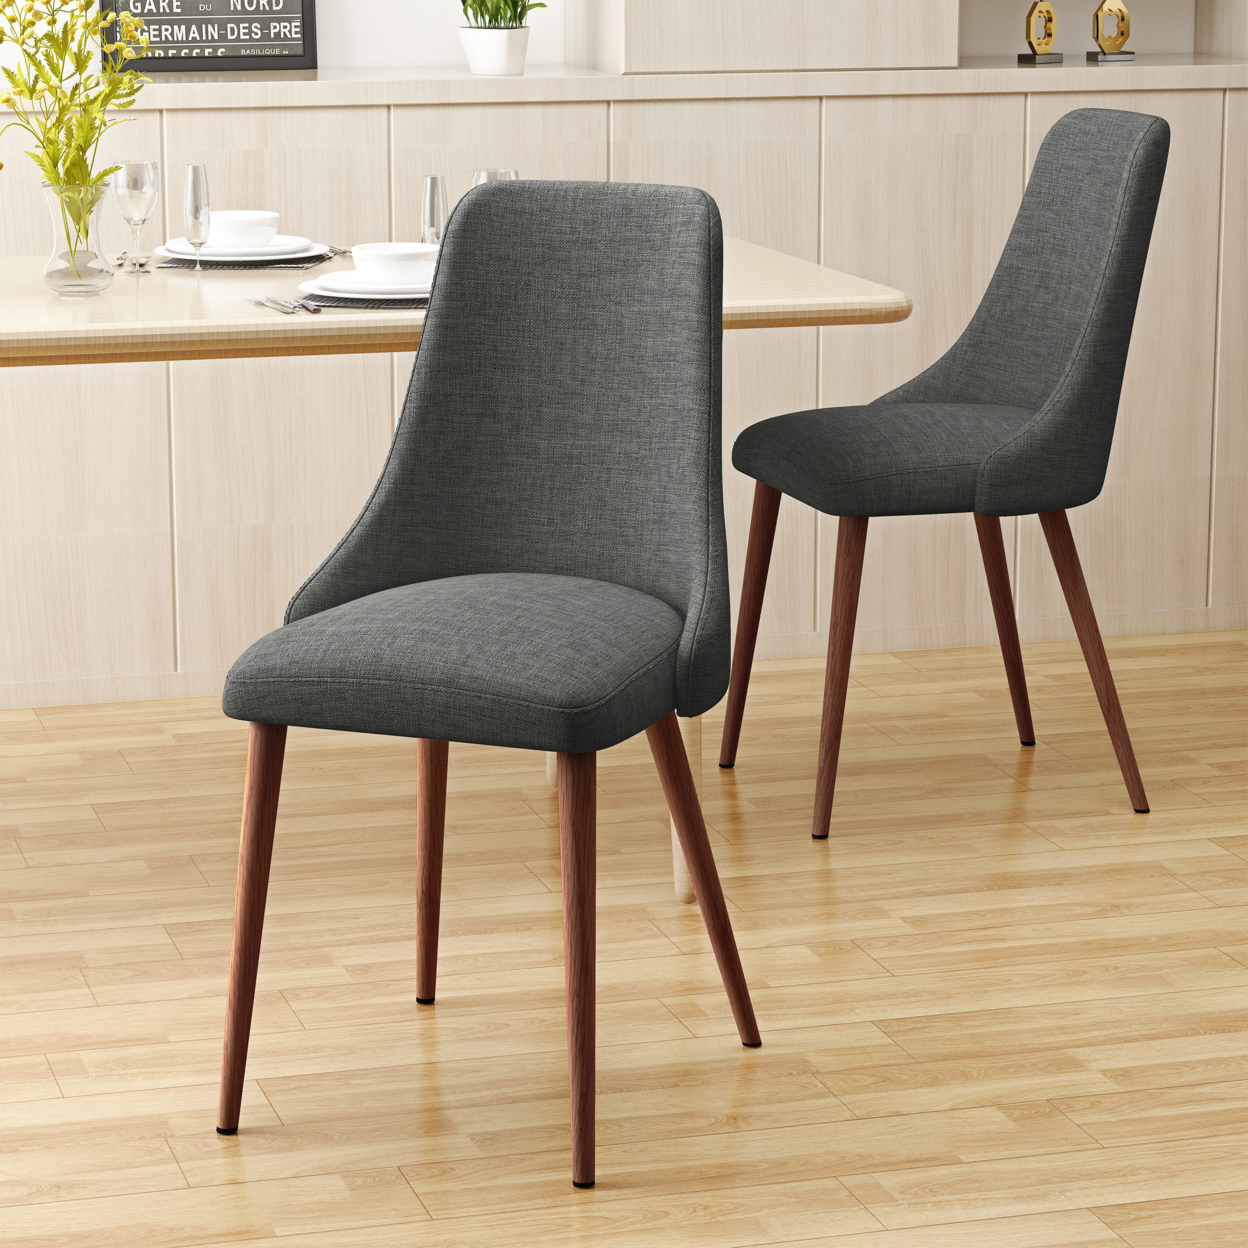 Soloman Mid Century Fabric Dining Chairs With Wood Finished Legs - Set Of 2 - Muted Blue